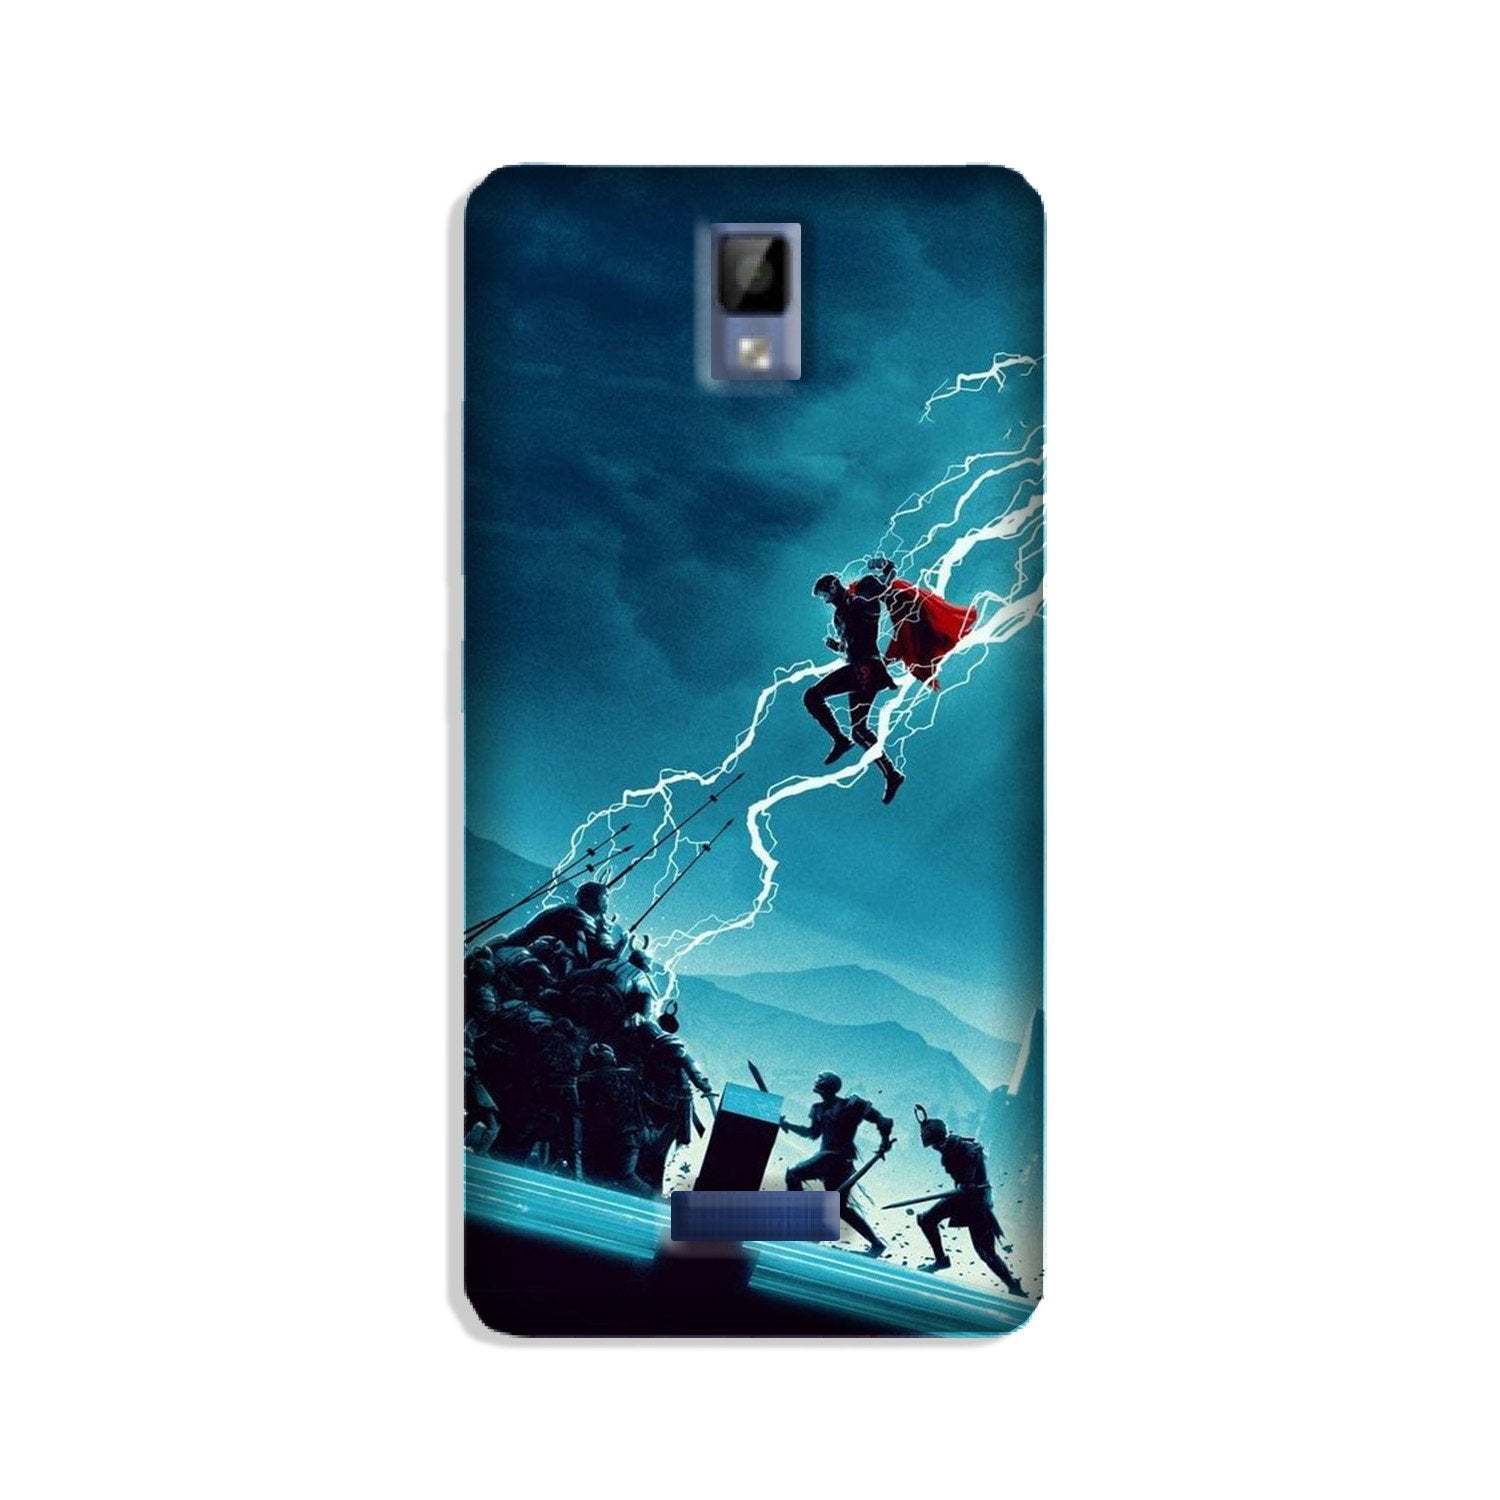 Thor Avengers Case for Gionee P7 (Design No. 243)